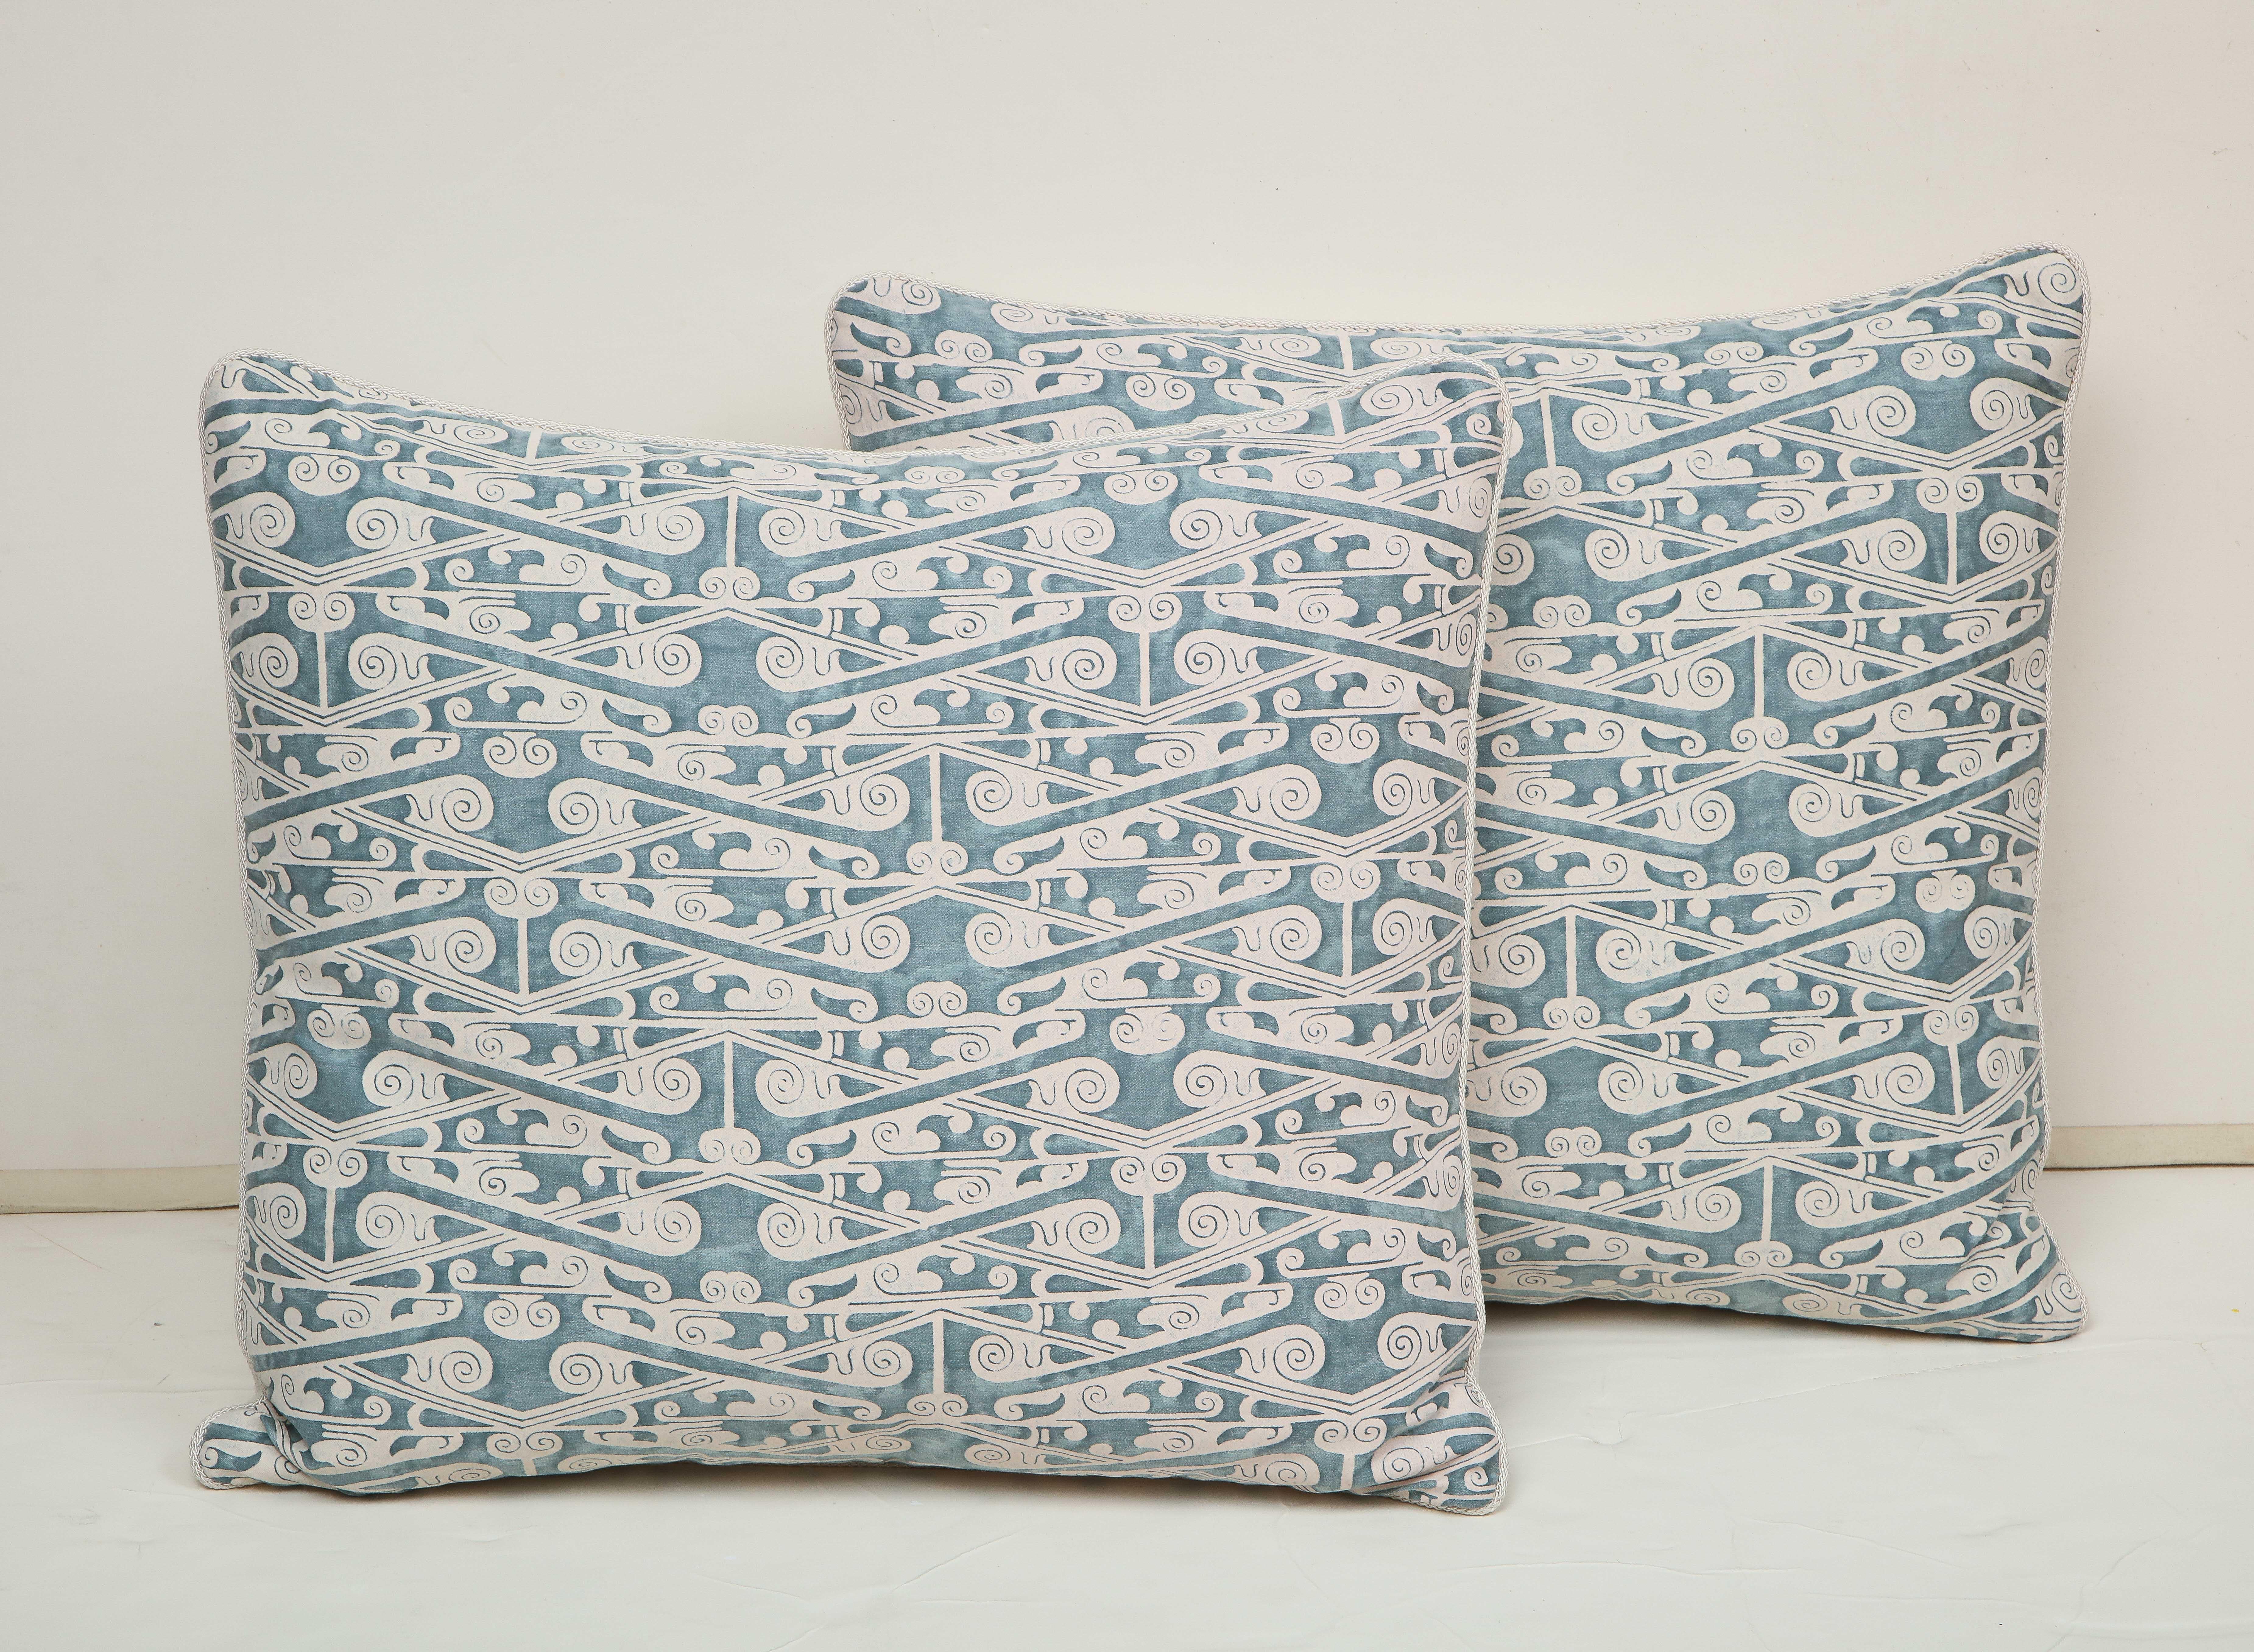 Pair of pillows covered in blue and white Fortuny silk and backed with natural linen. Individually priced at $475 each.